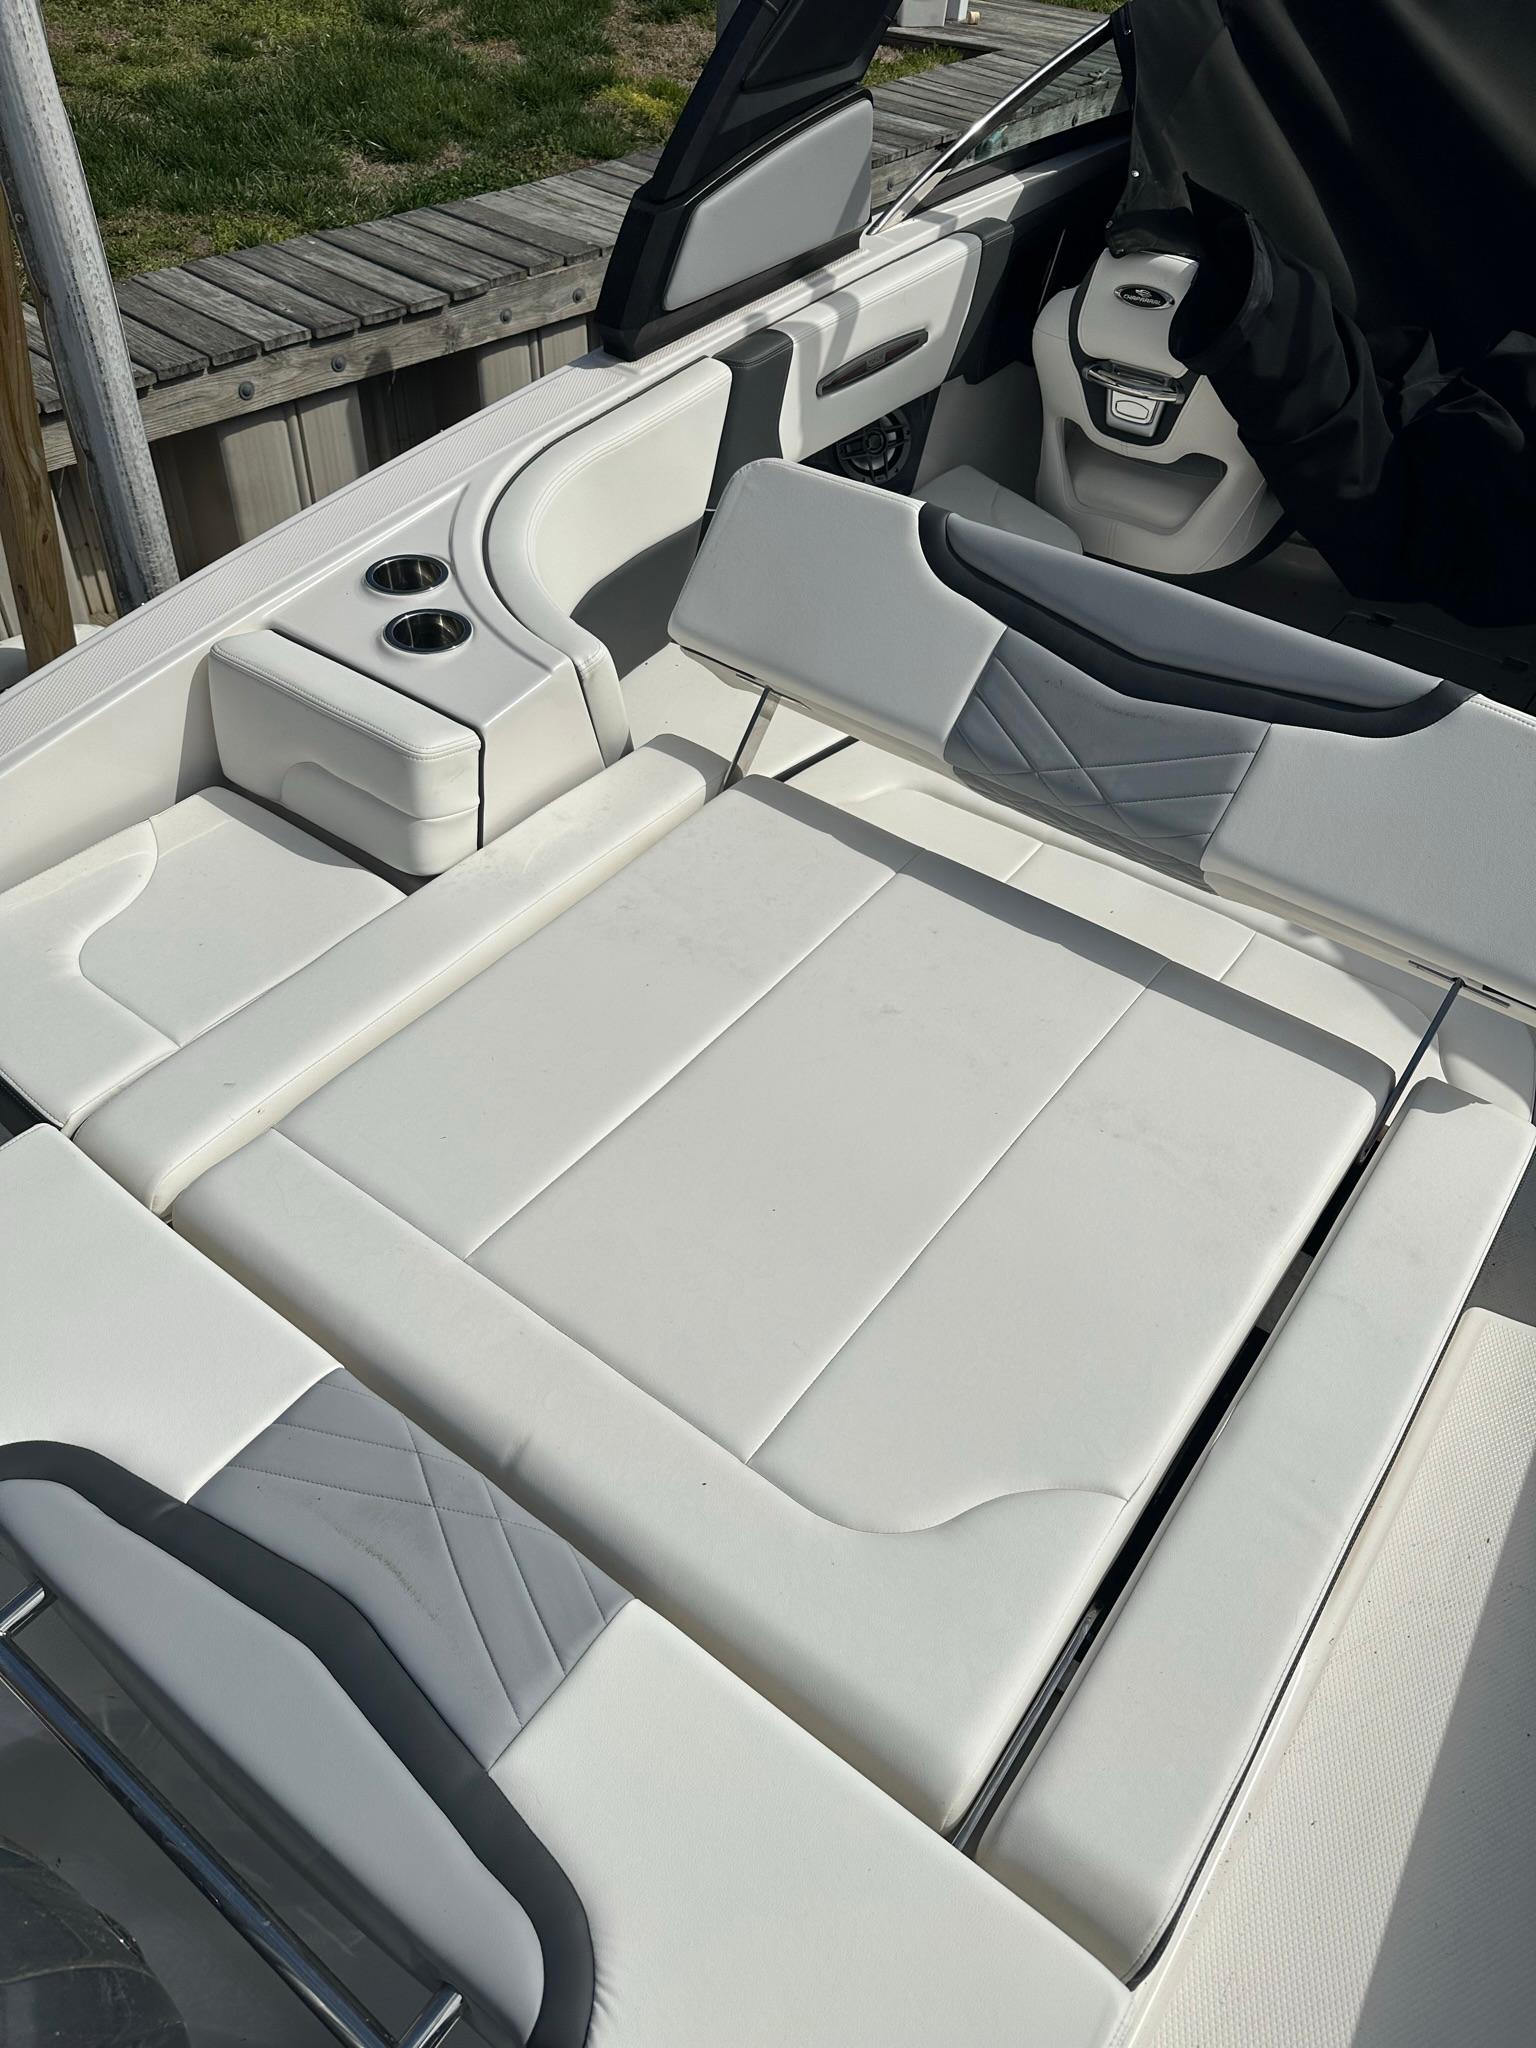 2022 Chaparral 267ssx OB, stern seat makes into an Awesome Sunpad